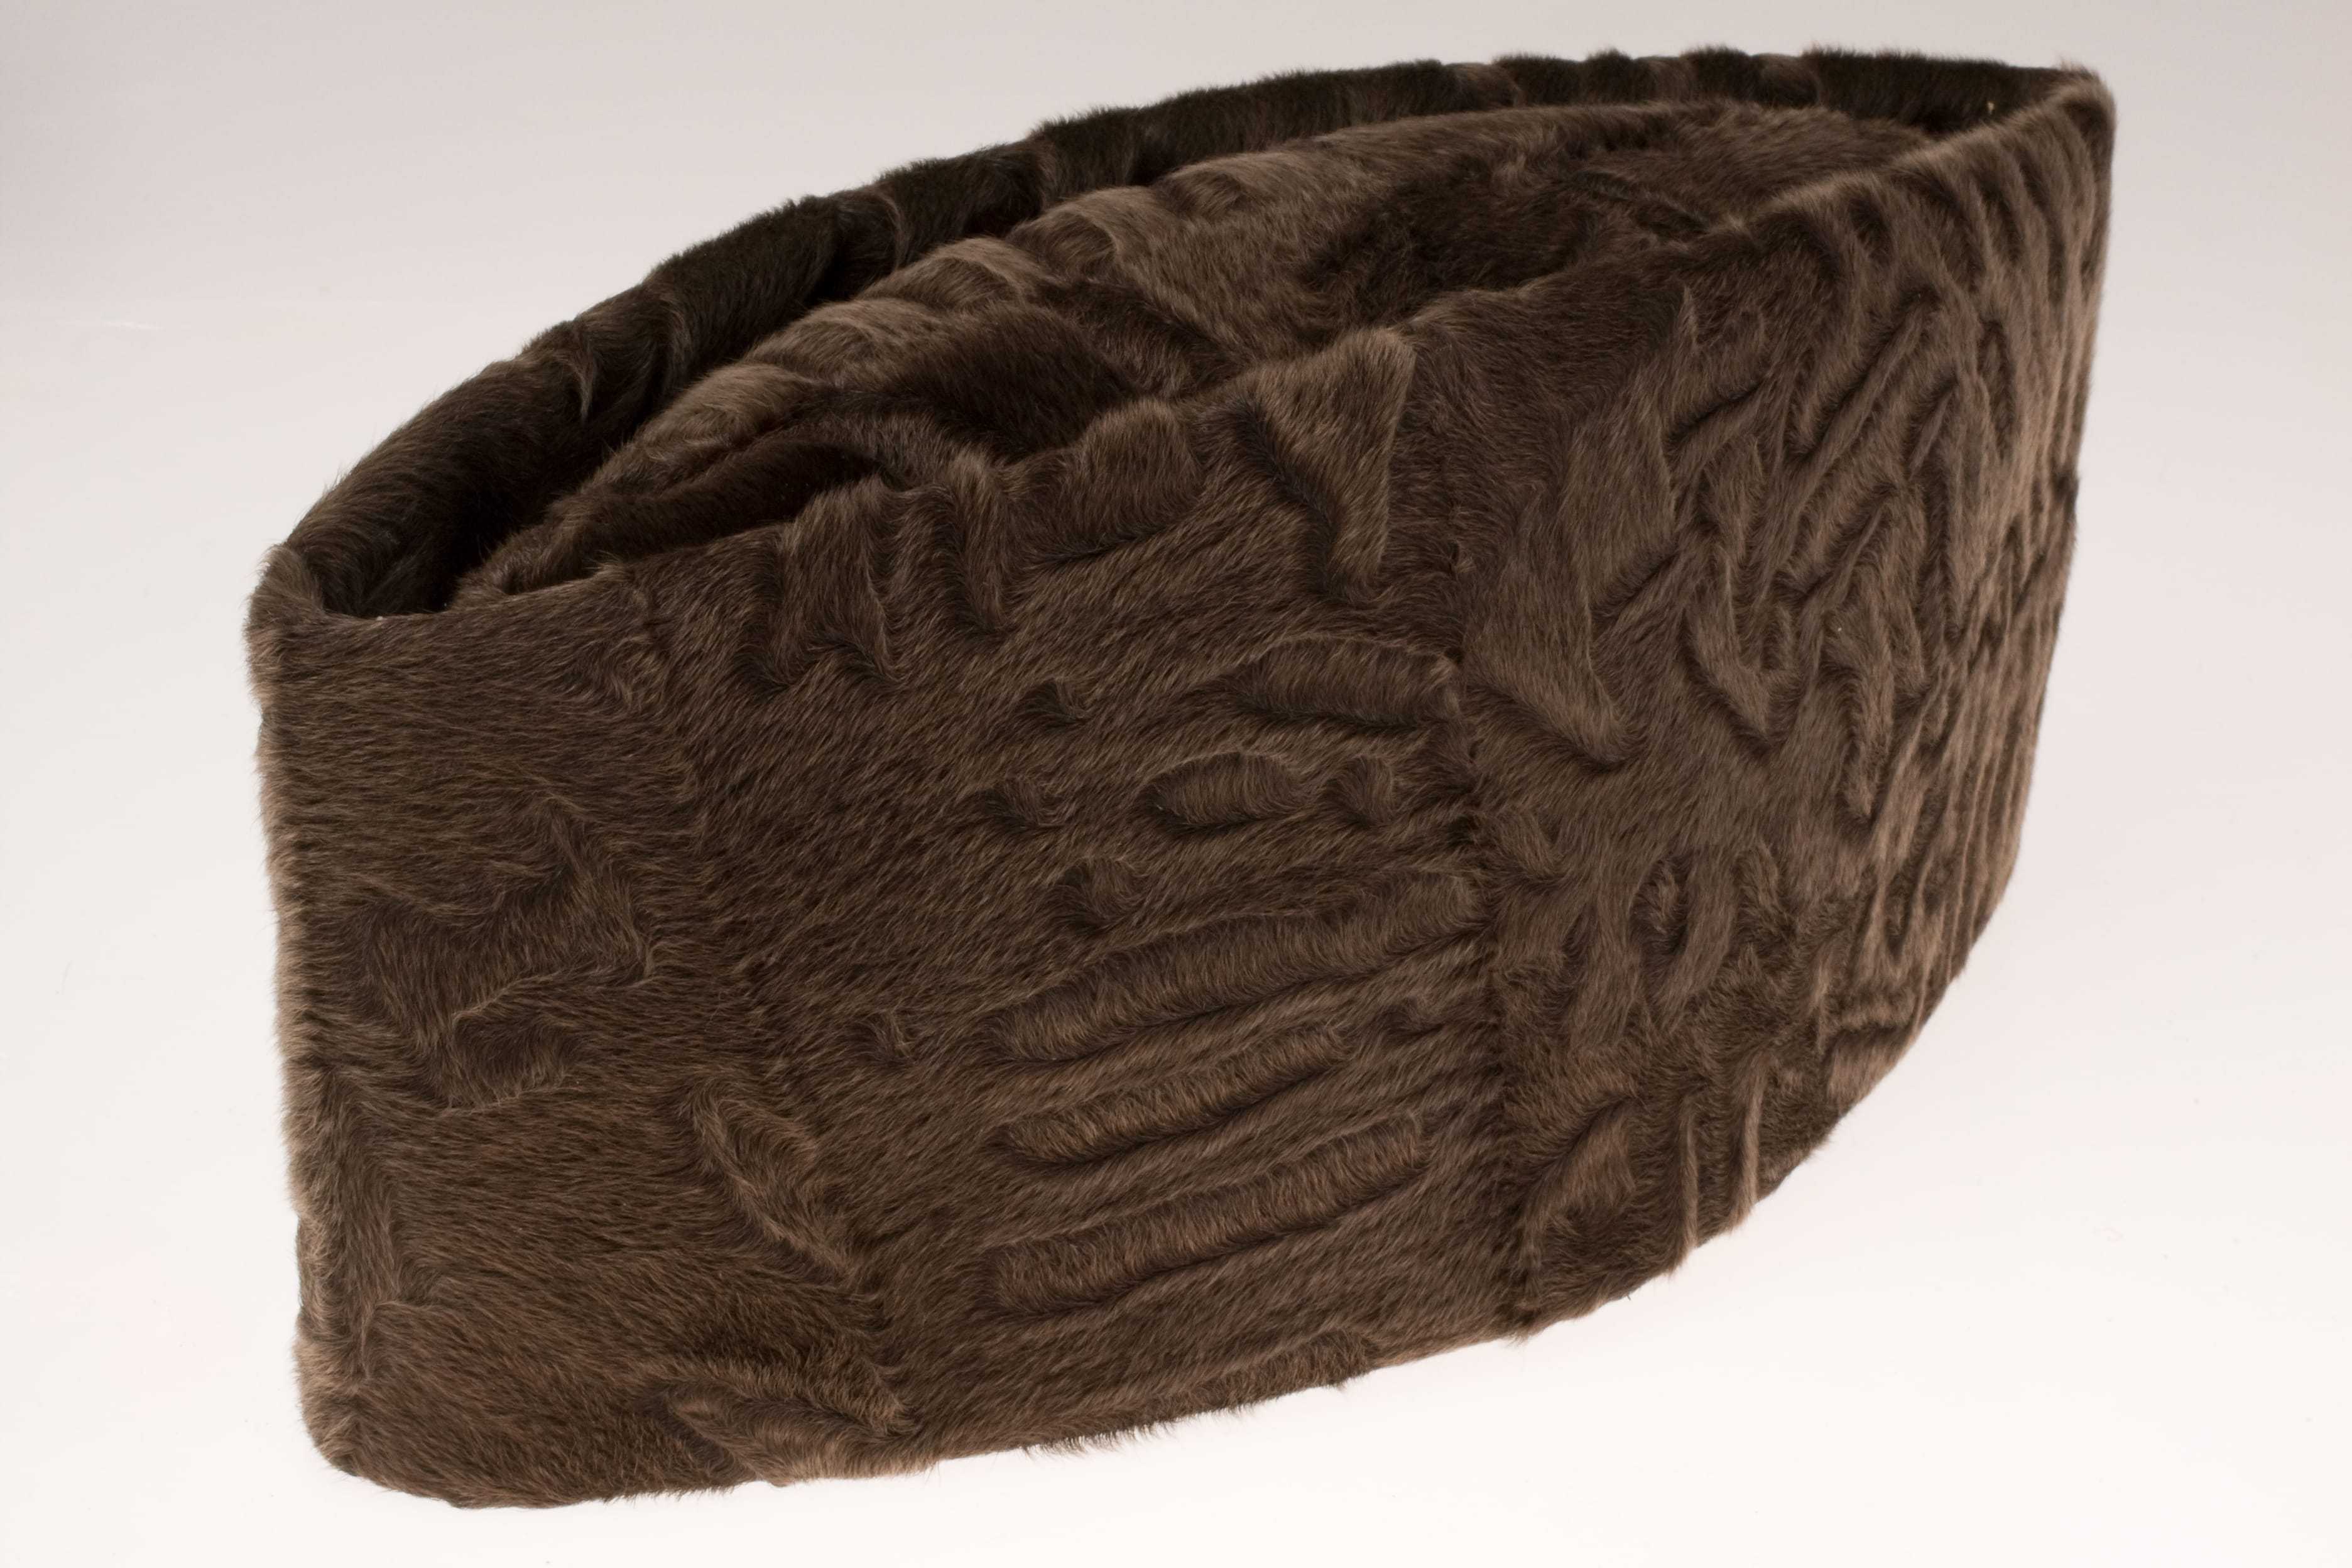 A short round hat, made of a furry brown material